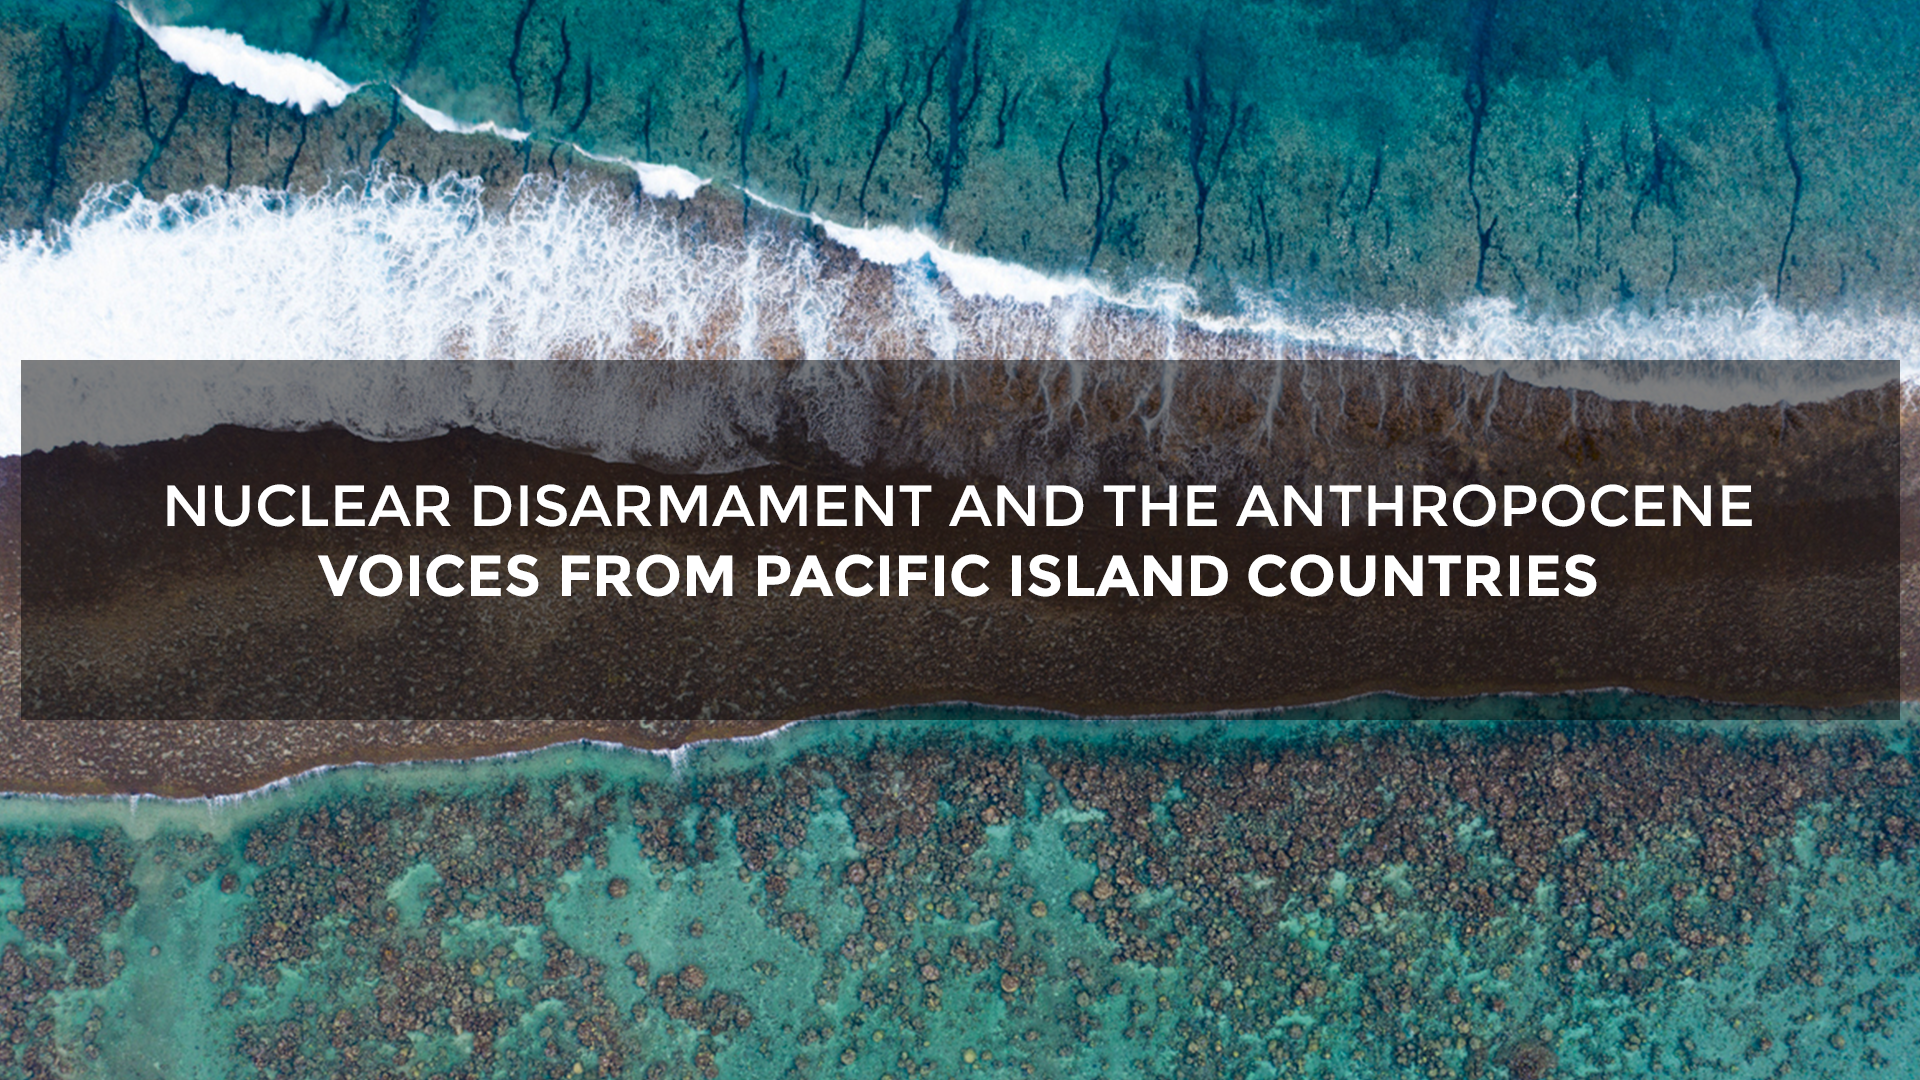 Nuclear Disarmament and the Anthropocene